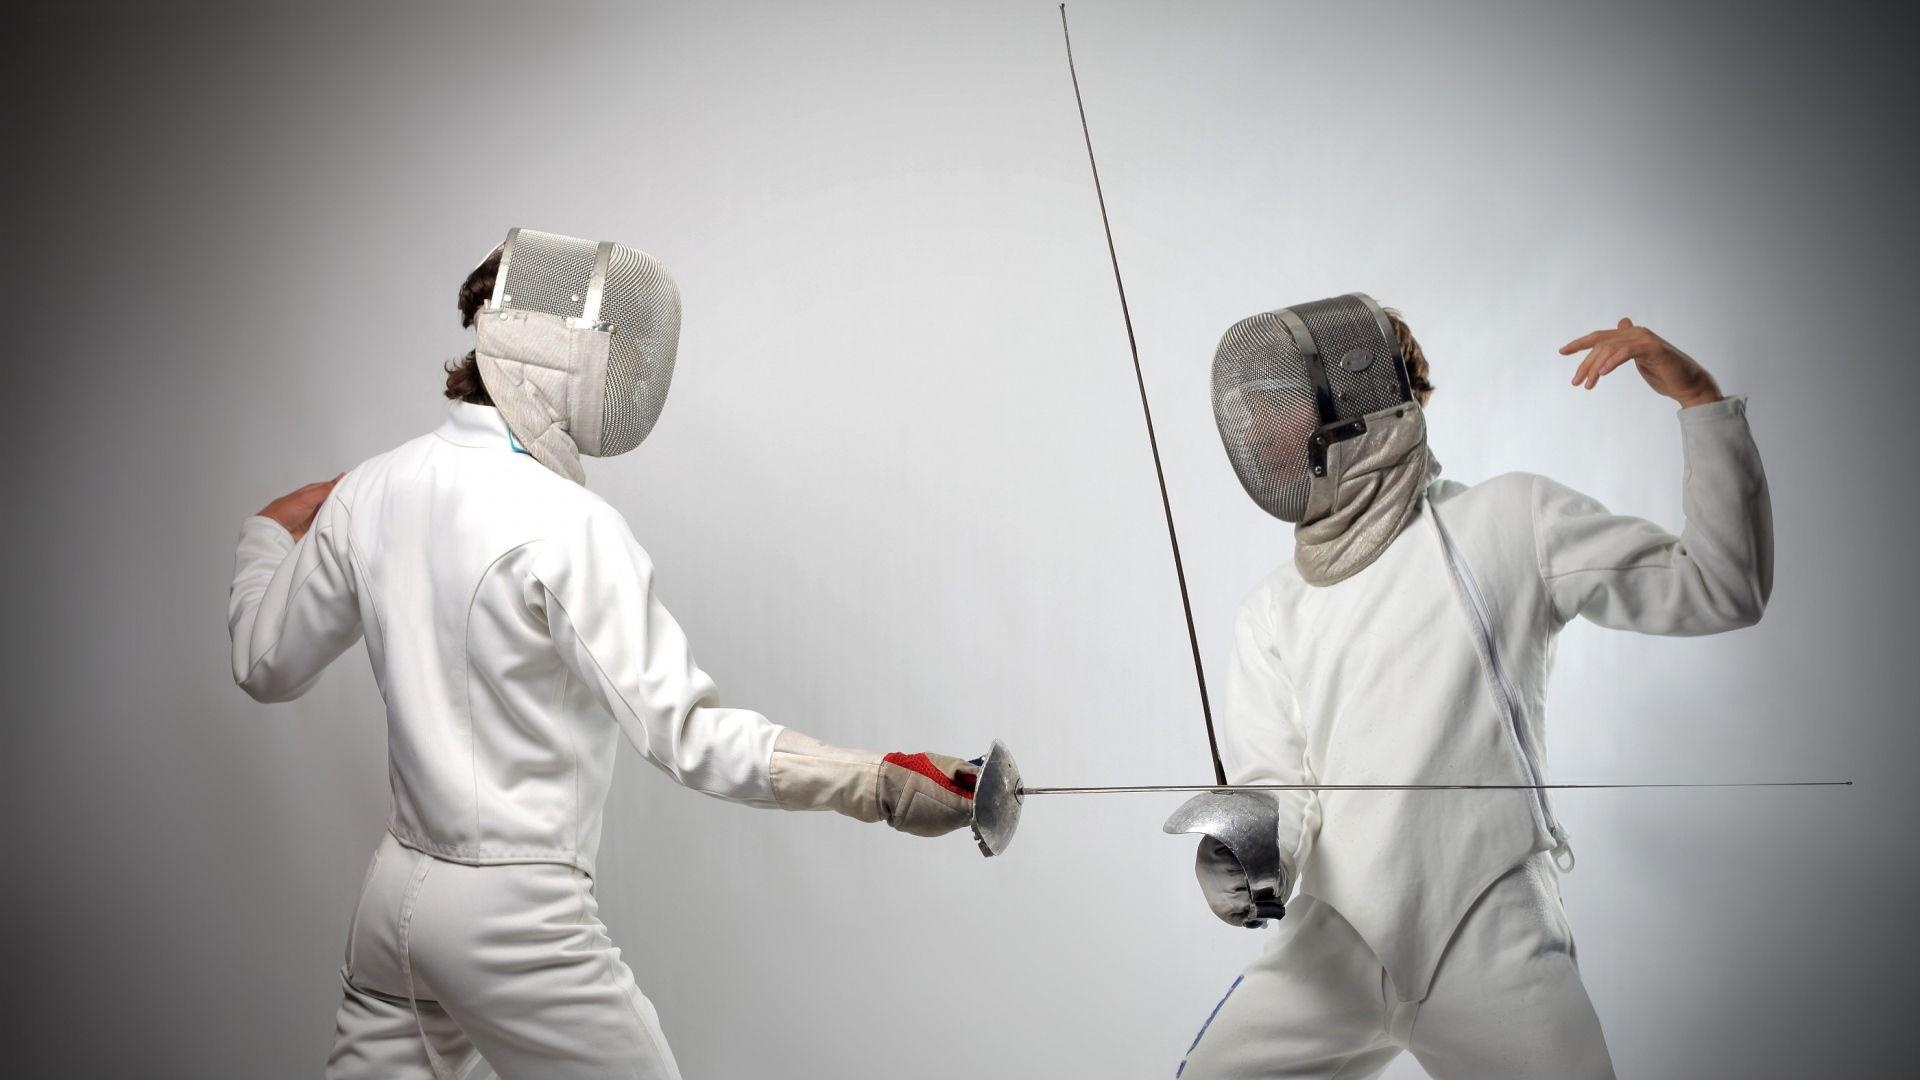 Fencing: One of the five activities which have been featured in every modern Olympic Games, Competitive sport. 1920x1080 Full HD Wallpaper.